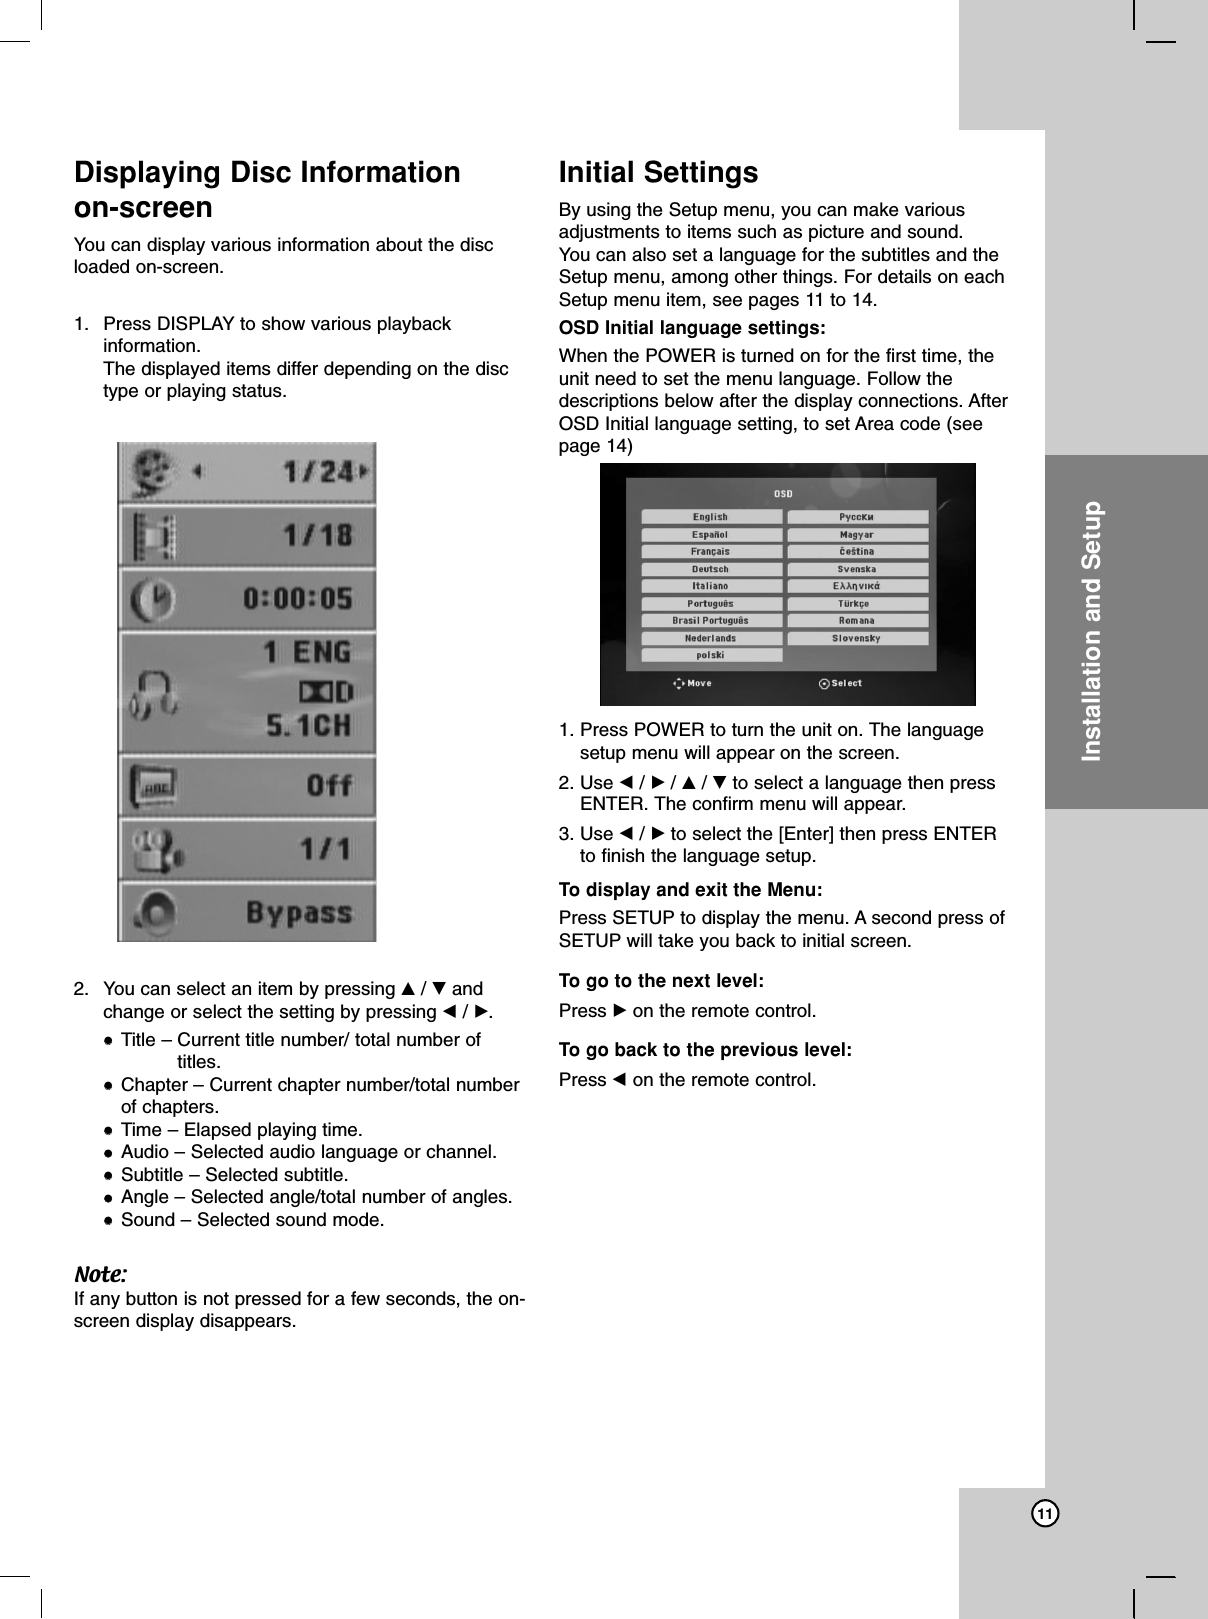 Operation Reference Introduction11Installation and SetupDisplaying Disc Information on-screenYou can display various information about the discloaded on-screen. 1. Press DISPLAY to show various playbackinformation.The displayed items differ depending on the disctype or playing status. 2. You can select an item by pressing v/ Vandchange or select the setting by pressing b/ B.Title – Current title number/ total number oftitles.Chapter – Current chapter number/total numberof chapters. Time – Elapsed playing time. Audio – Selected audio language or channel. Subtitle – Selected subtitle. Angle – Selected angle/total number of angles. Sound – Selected sound mode. Note:If any button is not pressed for a few seconds, the on-screen display disappears.Initial SettingsBy using the Setup menu, you can make variousadjustments to items such as picture and sound. You can also set a language for the subtitles and theSetup menu, among other things. For details on eachSetup menu item, see pages 11 to 14.OSD Initial language settings:When the POWER is turned on for the first time, theunit need to set the menu language. Follow thedescriptions below after the display connections. AfterOSD Initial language setting, to set Area code (seepage 14)1. Press POWER to turn the unit on. The languagesetup menu will appear on the screen.2. Use b/ B/ v/ Vto select a language then pressENTER. The confirm menu will appear.3. Use b/ Bto select the [Enter] then press ENTERto finish the language setup.To display and exit the Menu:Press SETUP to display the menu. A second press ofSETUP will take you back to initial screen.To go to the next level: Press Bon the remote control. To go back to the previous level:Press bon the remote control.